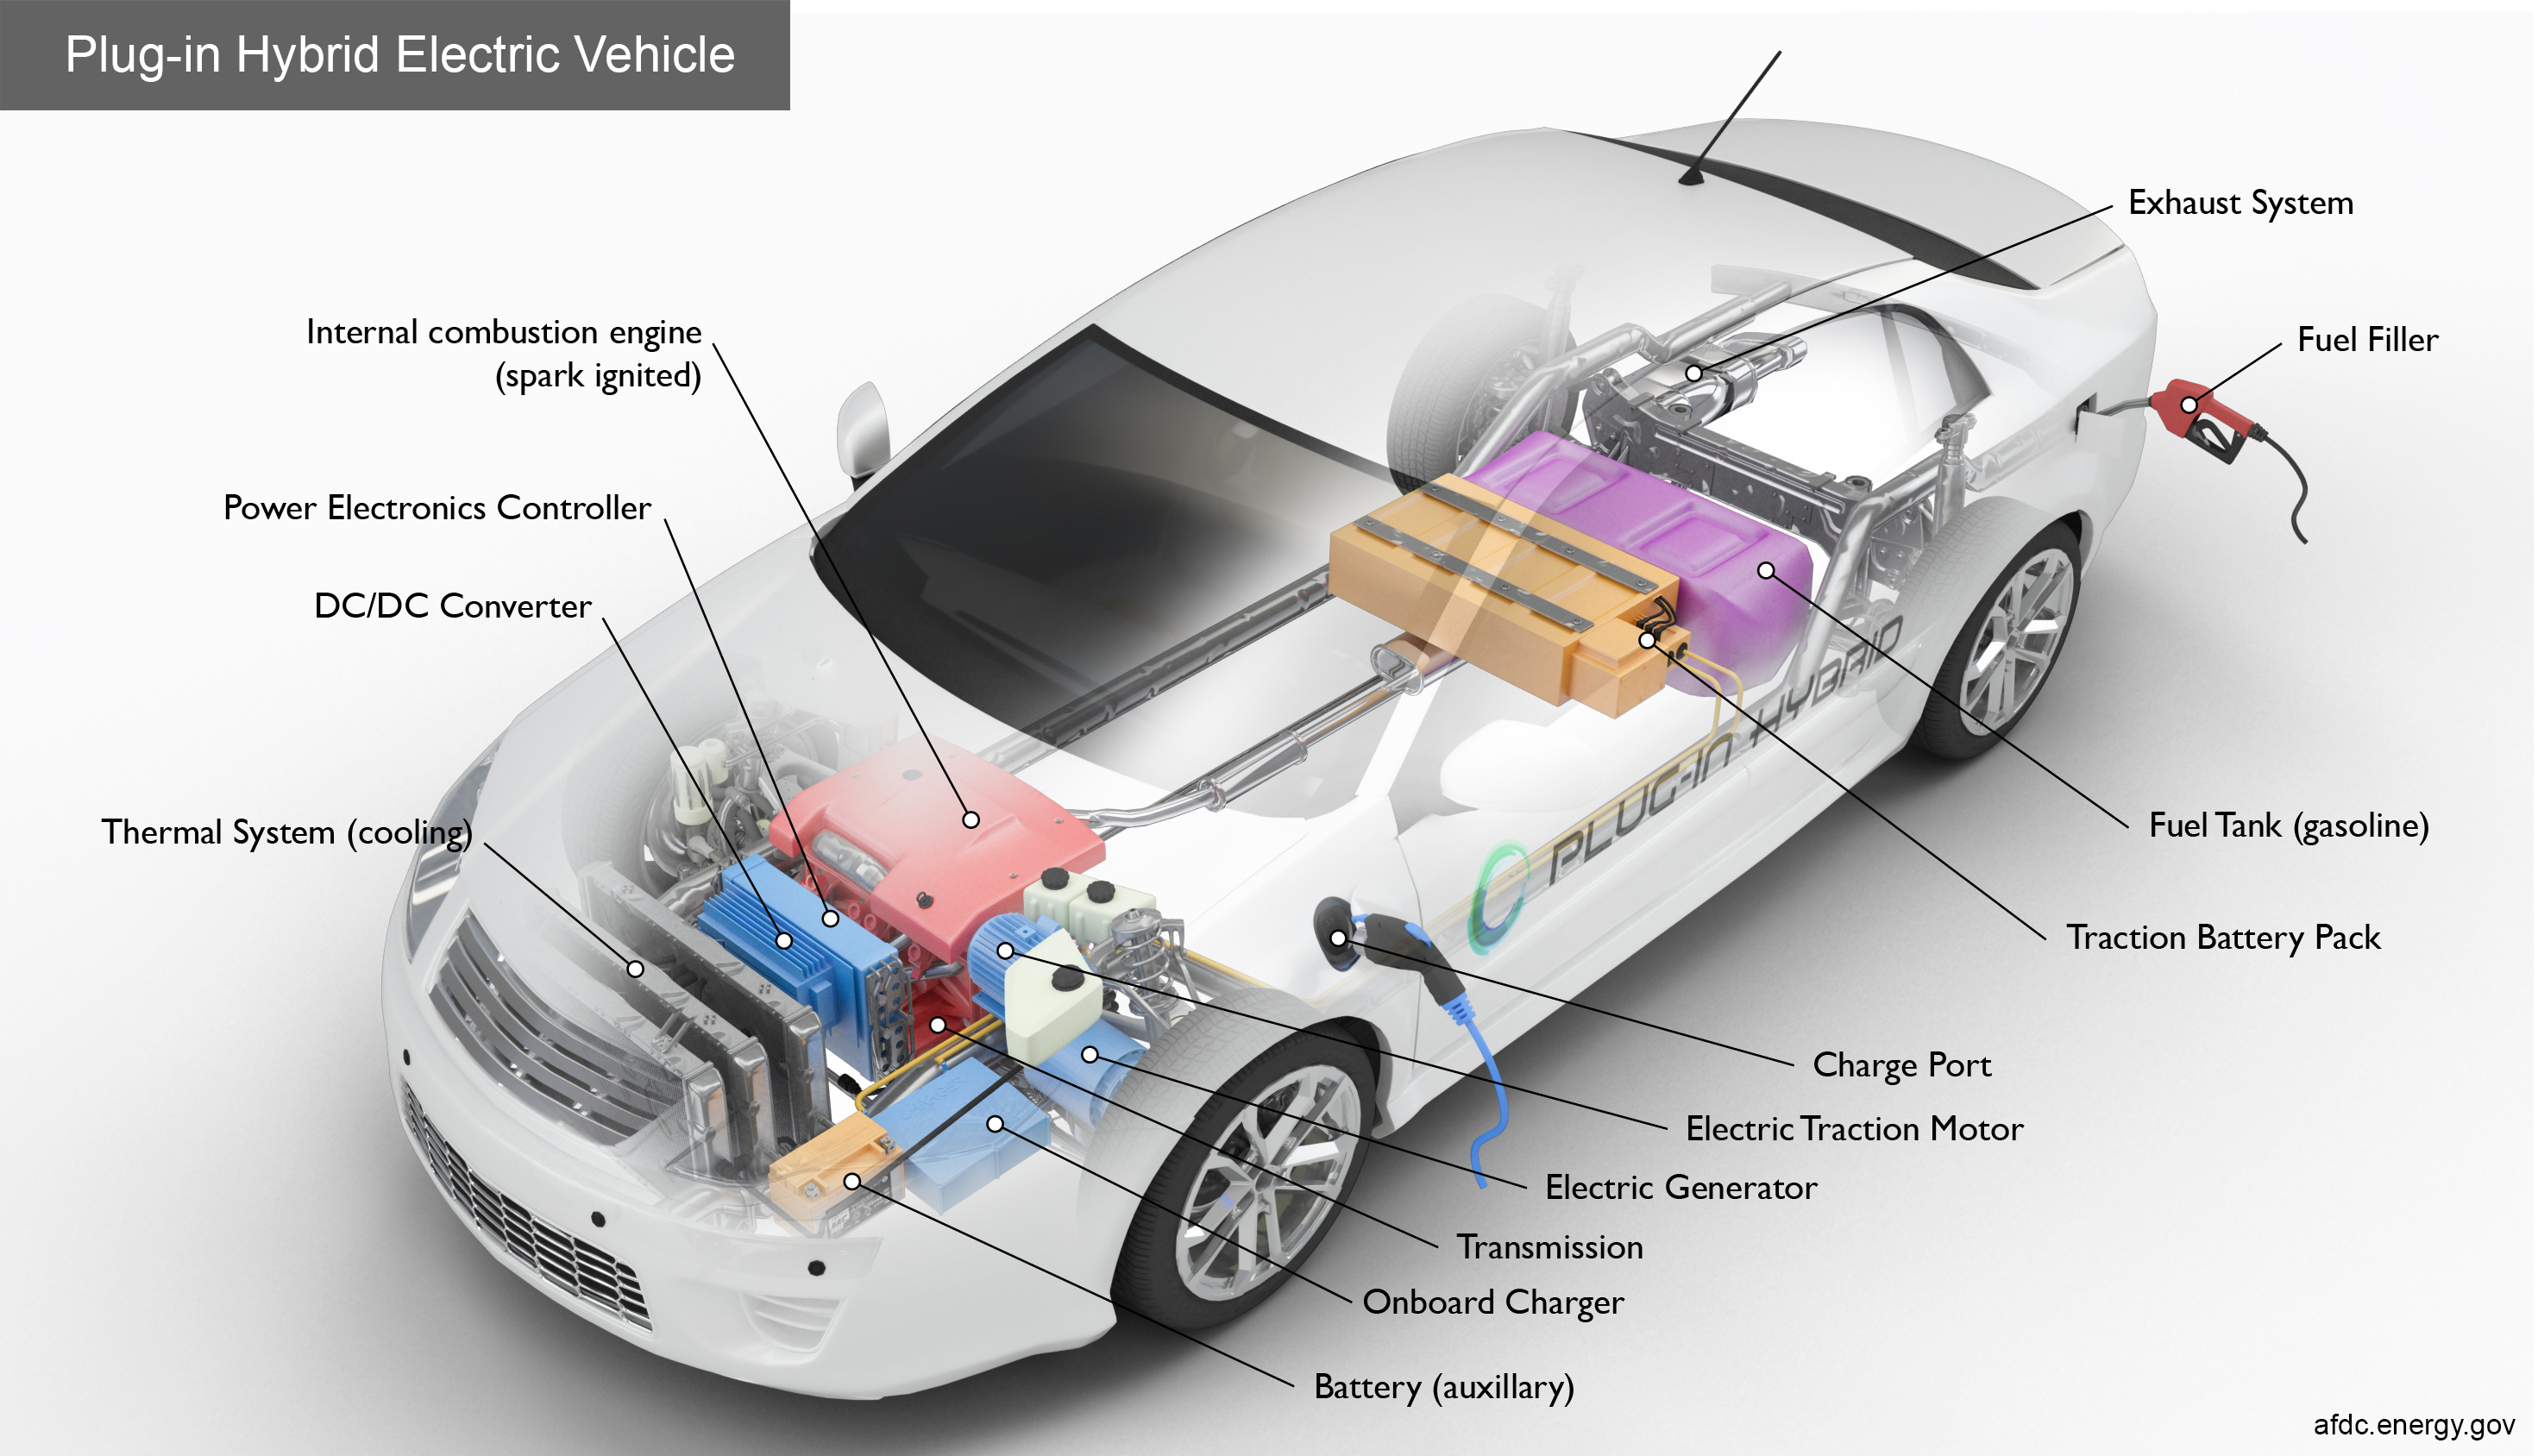 DCLink design tips how to choose capacitors for EVs